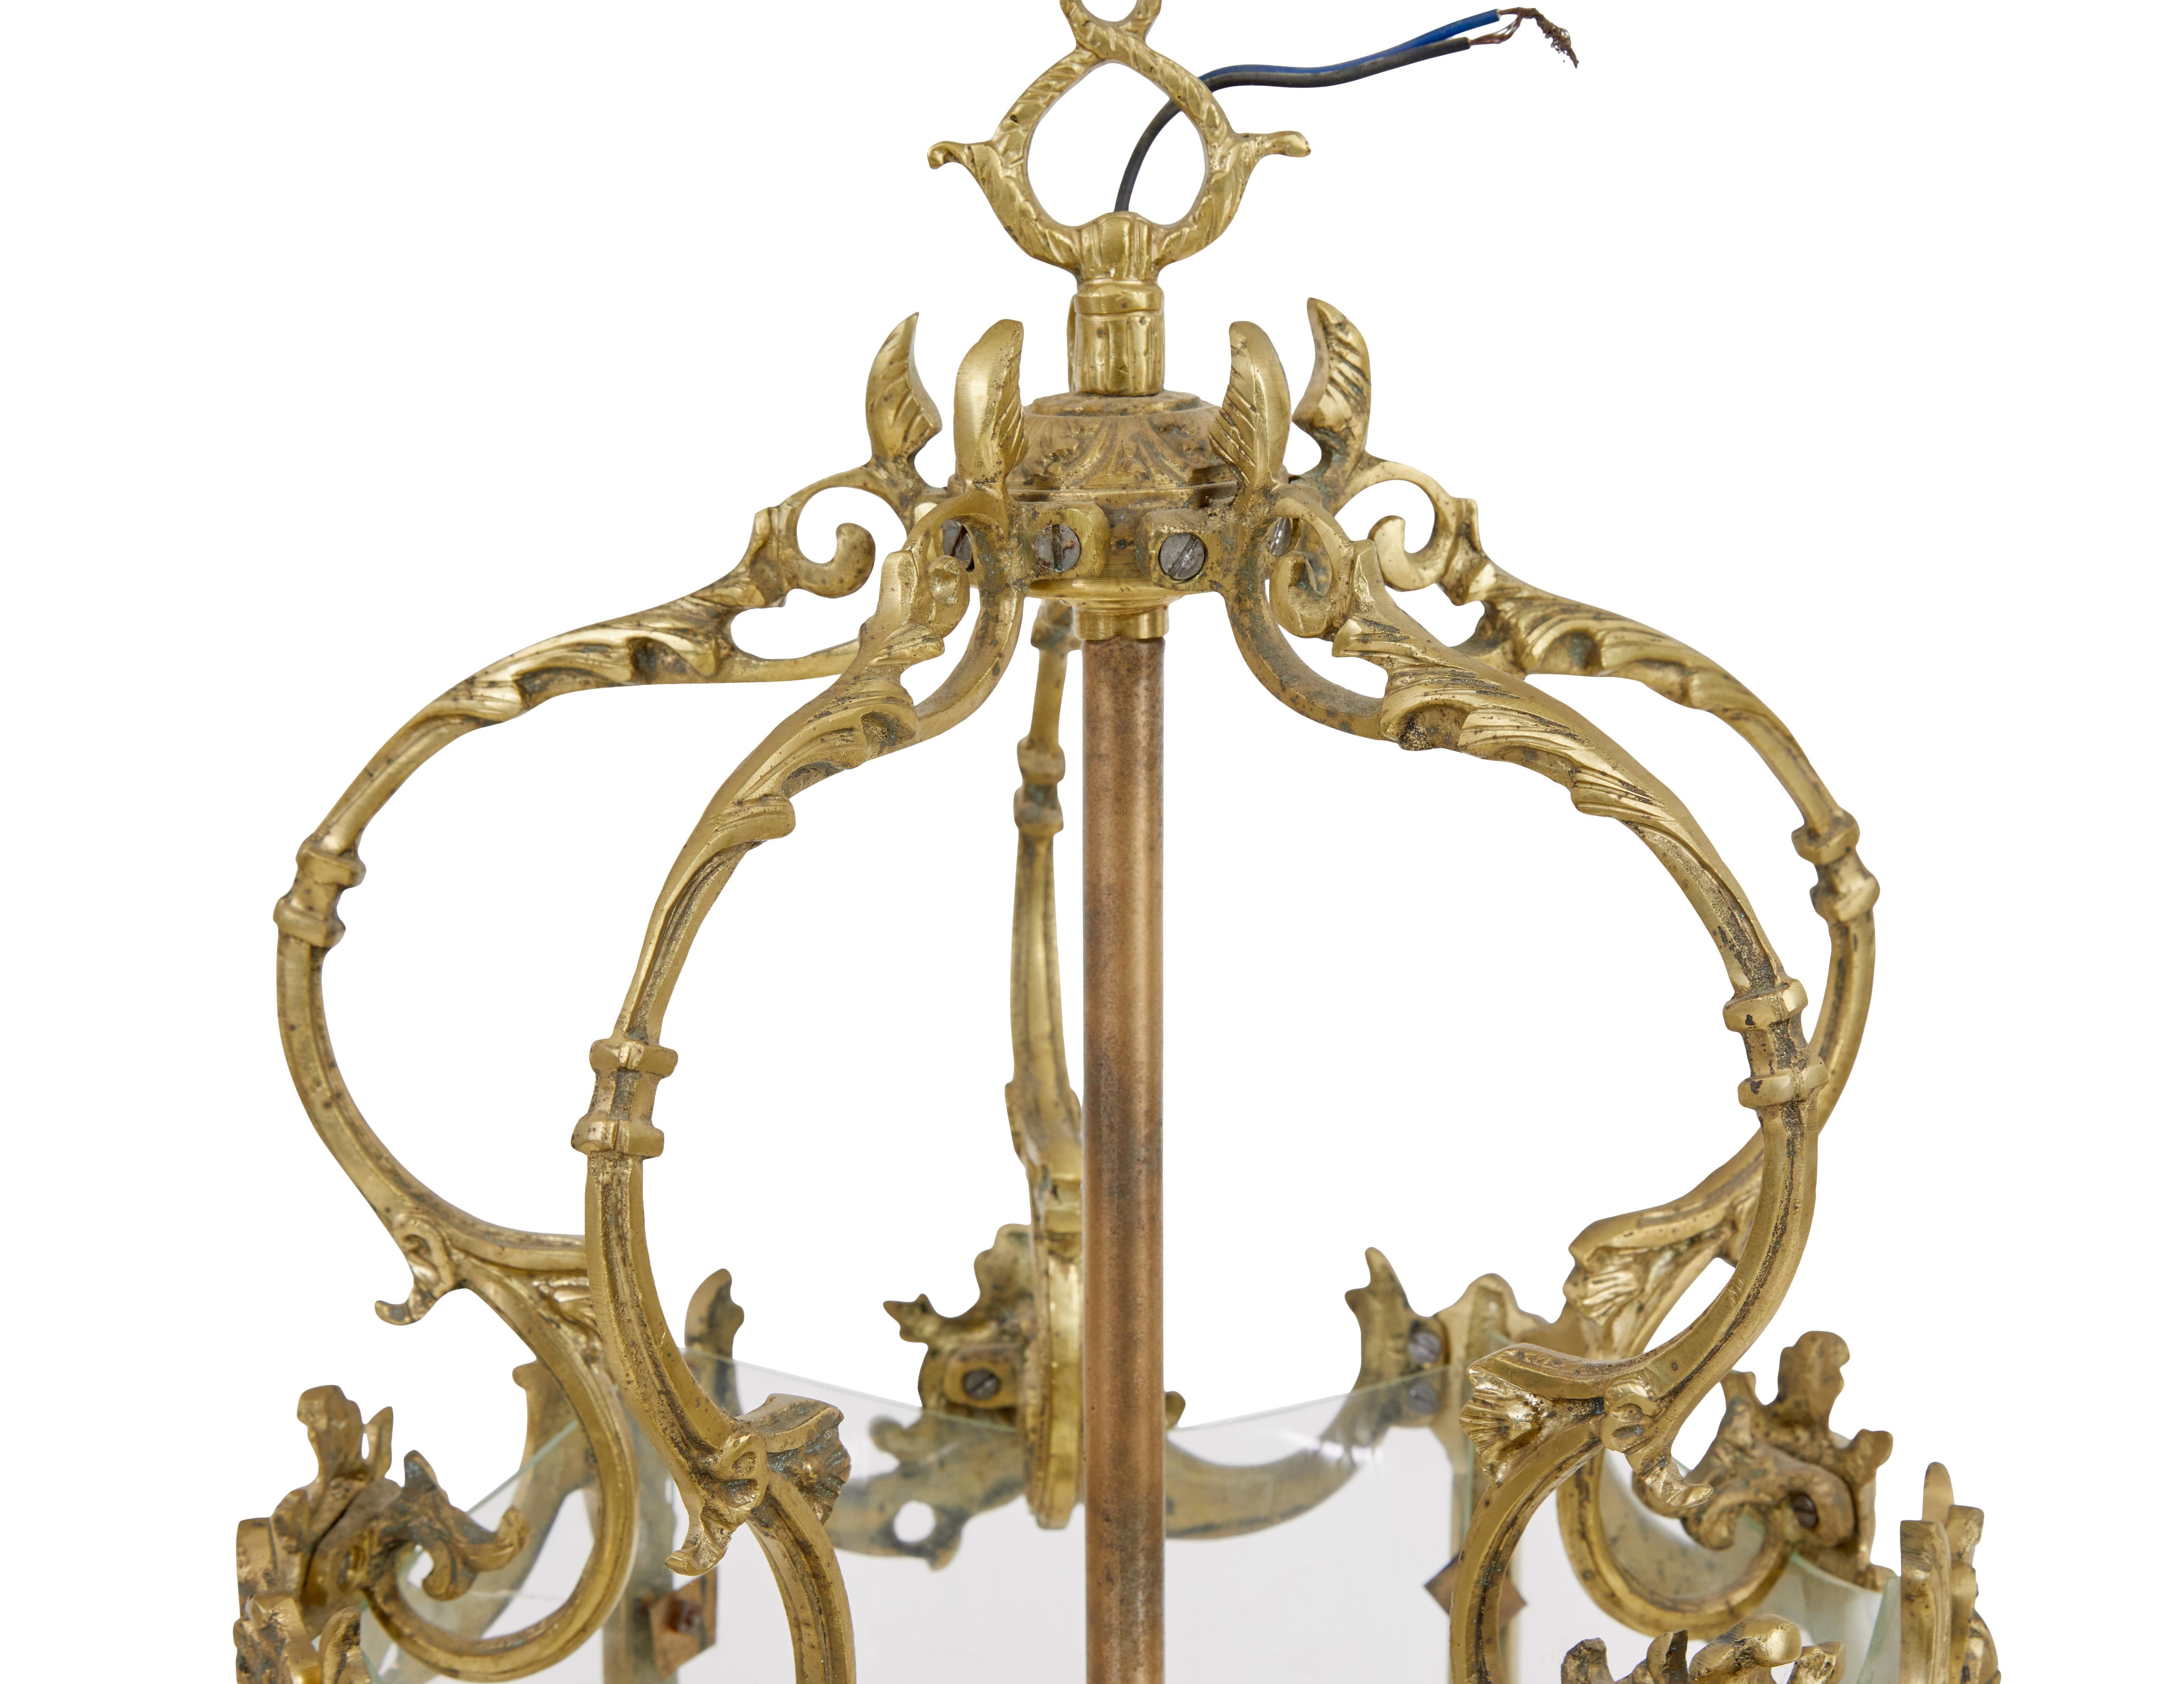 Early 20th century french ormolu lantern circa 1910.

Original etched glass encased by a decorative ormolu frame.  Ideal size and shaped for the hallway or entrance.

This lantern is wired but untested, we recommended that this is professionally